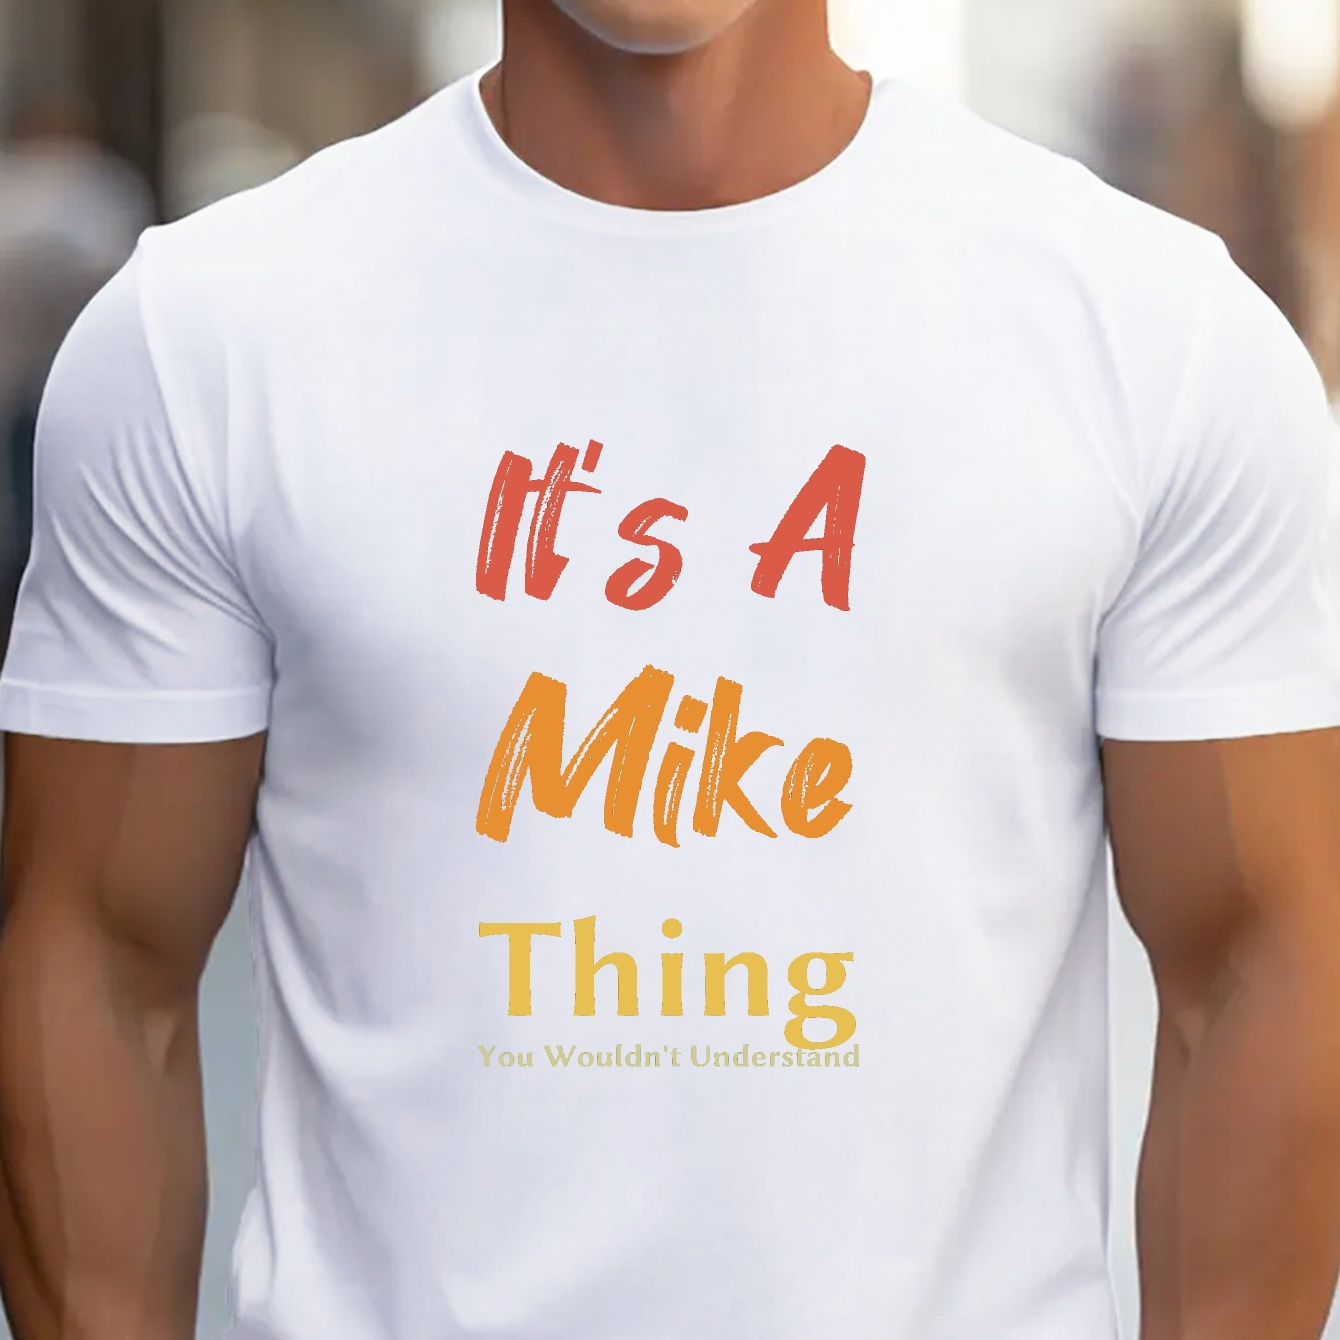 

1 Pc, 100% Cotton T-shirt, Casual Tees For Men, Comfort Fit Short Sleeves With "it's A Mike Thing" Print, Fashion T-shirts For Everyday Wear